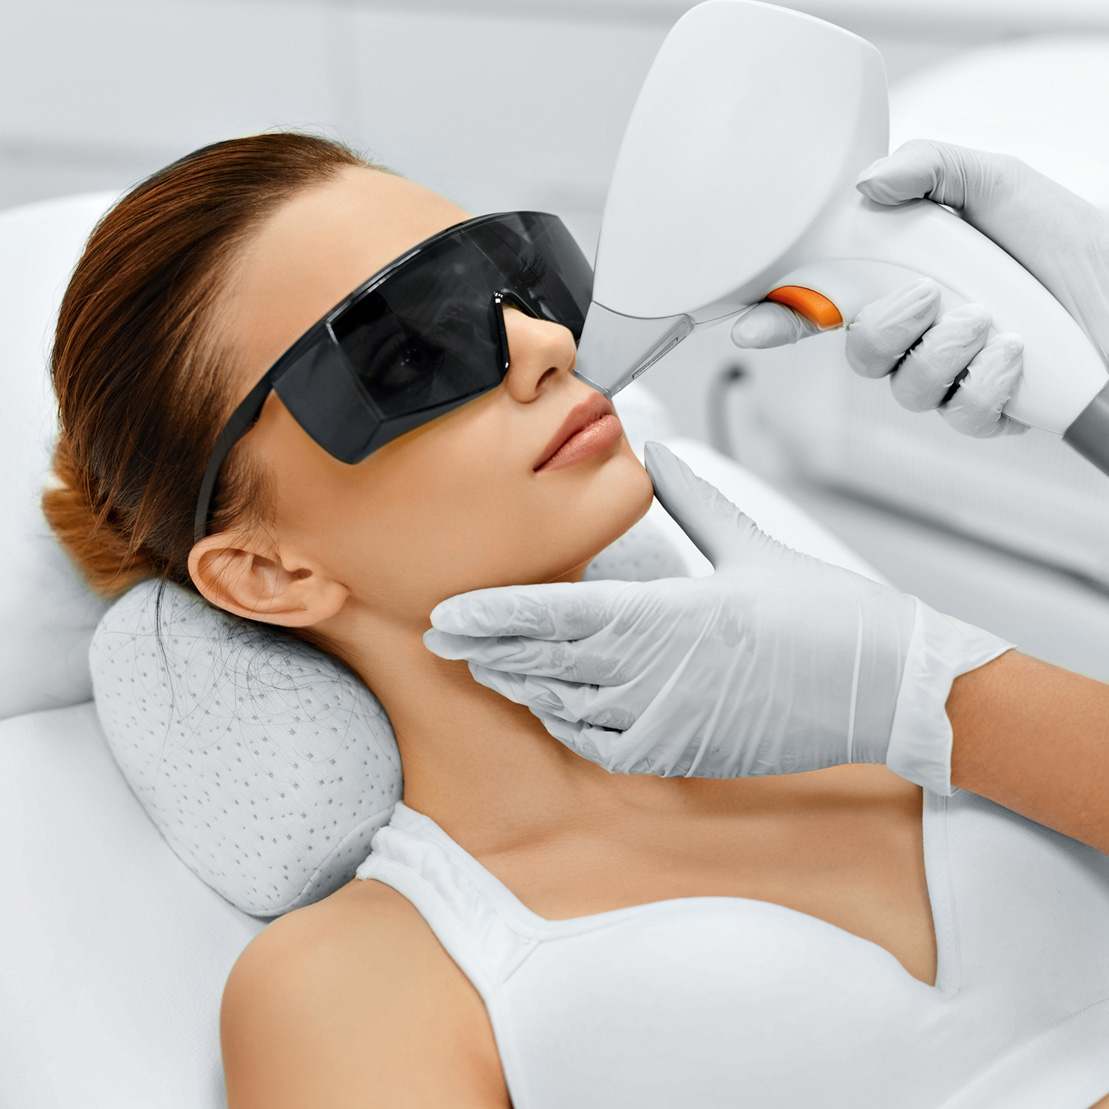 Laser Hair Removal Packages in South Mumbai | The Bombay Skin Clinic